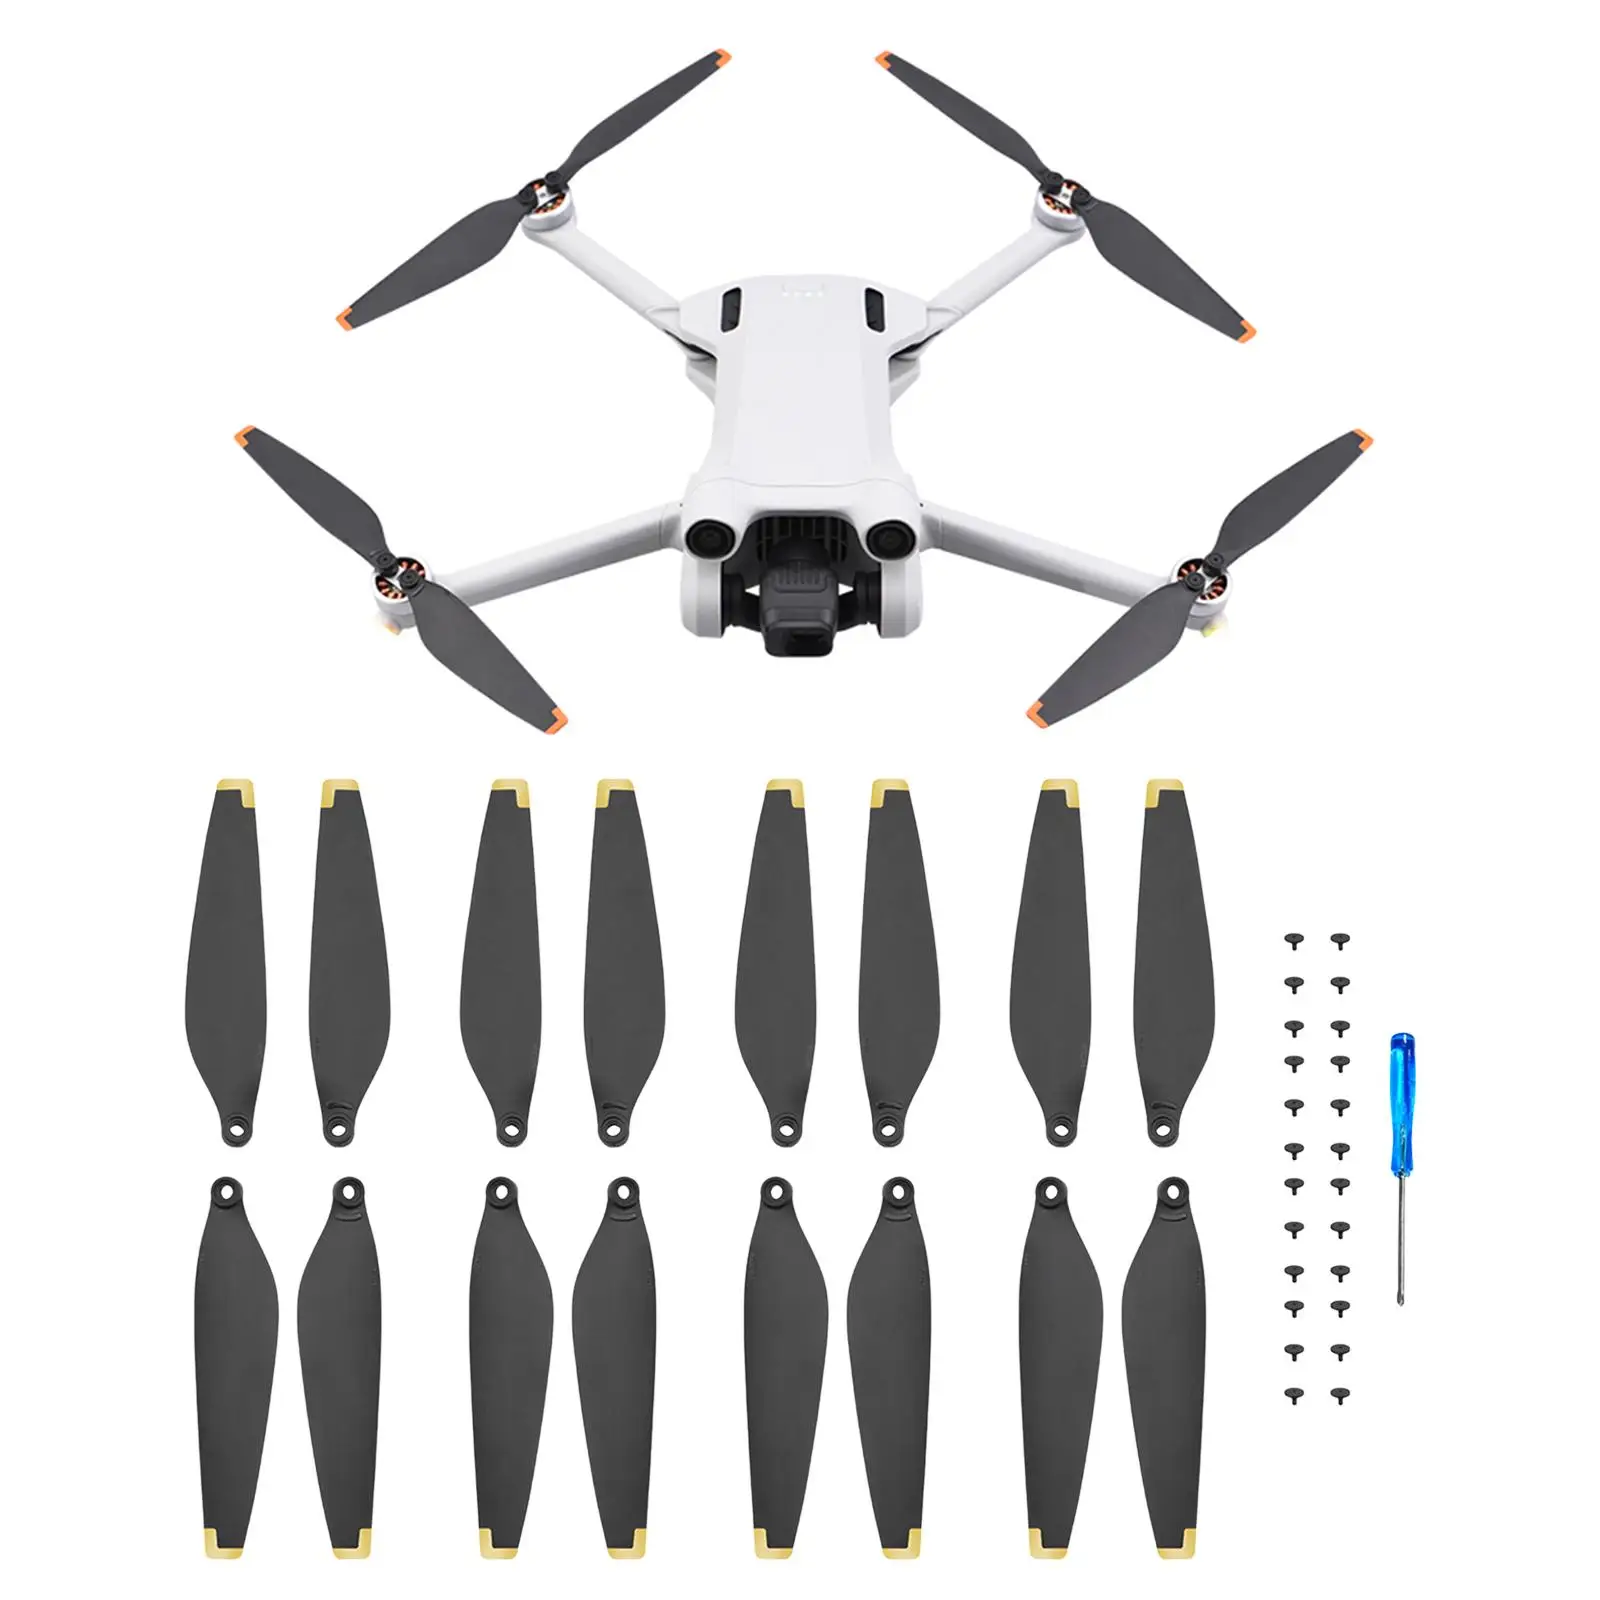 

16Pcs Propellers Low Noise Quick Release Paddle Blades wings Lightweight Blades Props for DJI Mini 3 Pro Drone Accessory